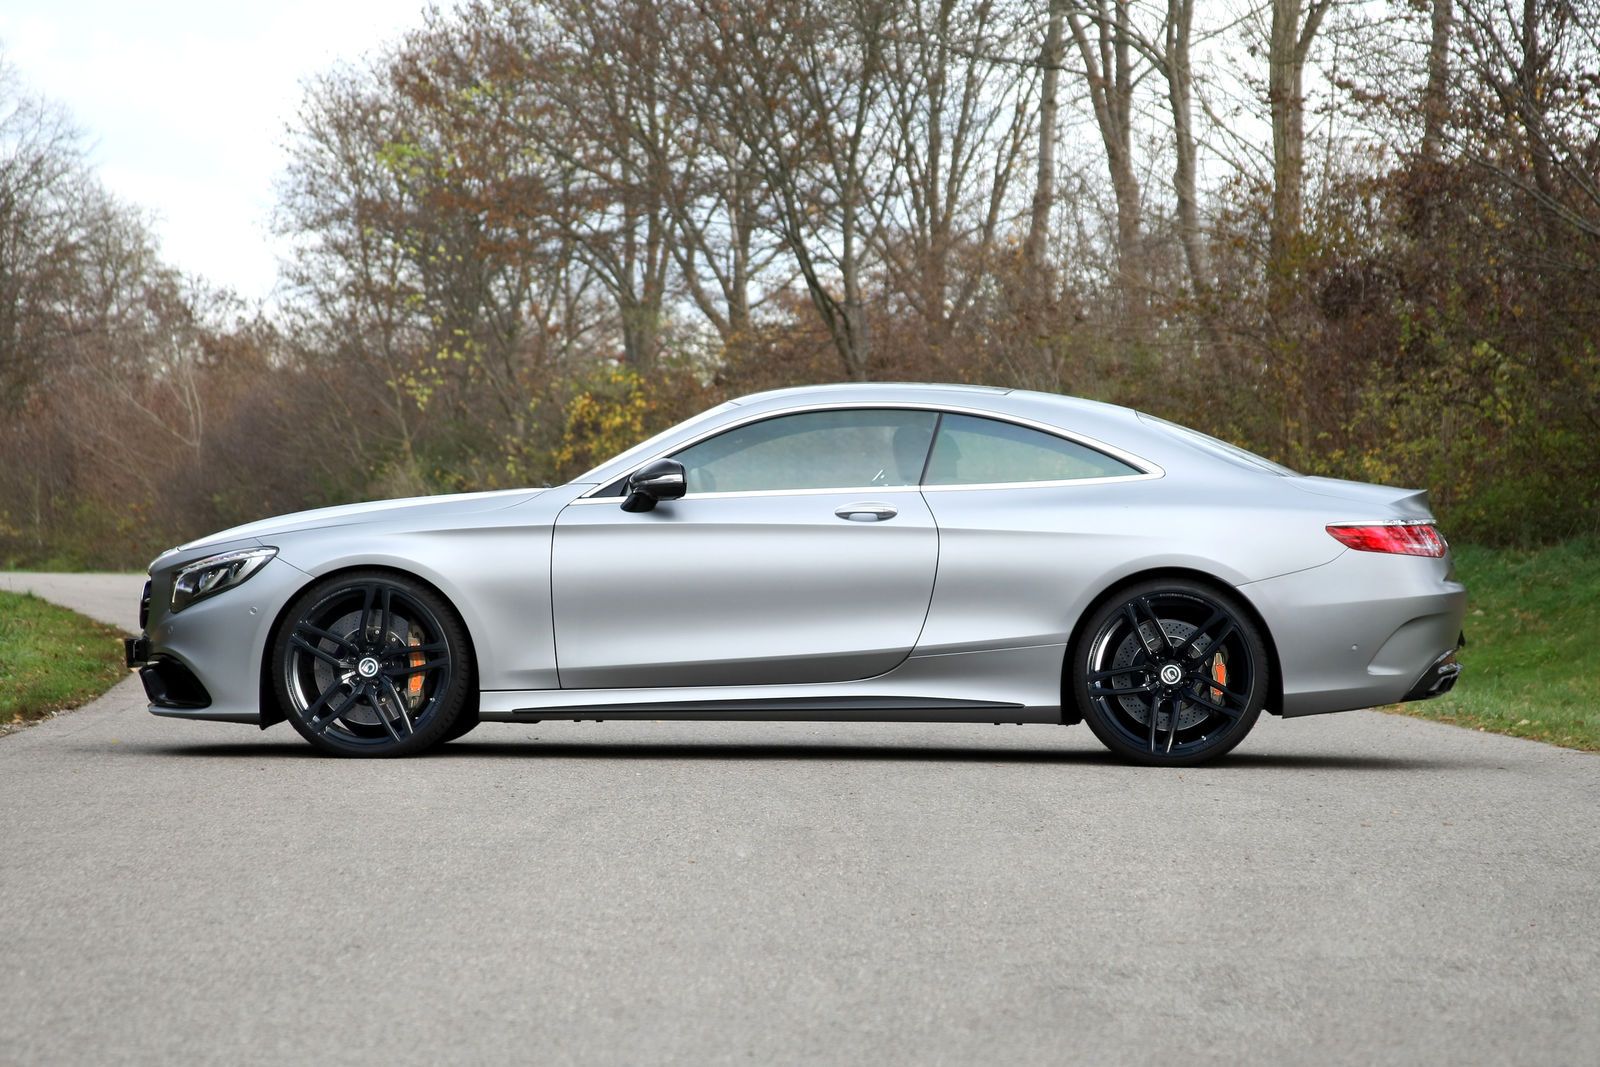 2016 Mercedes-AMG S63 Coupe By G-Power